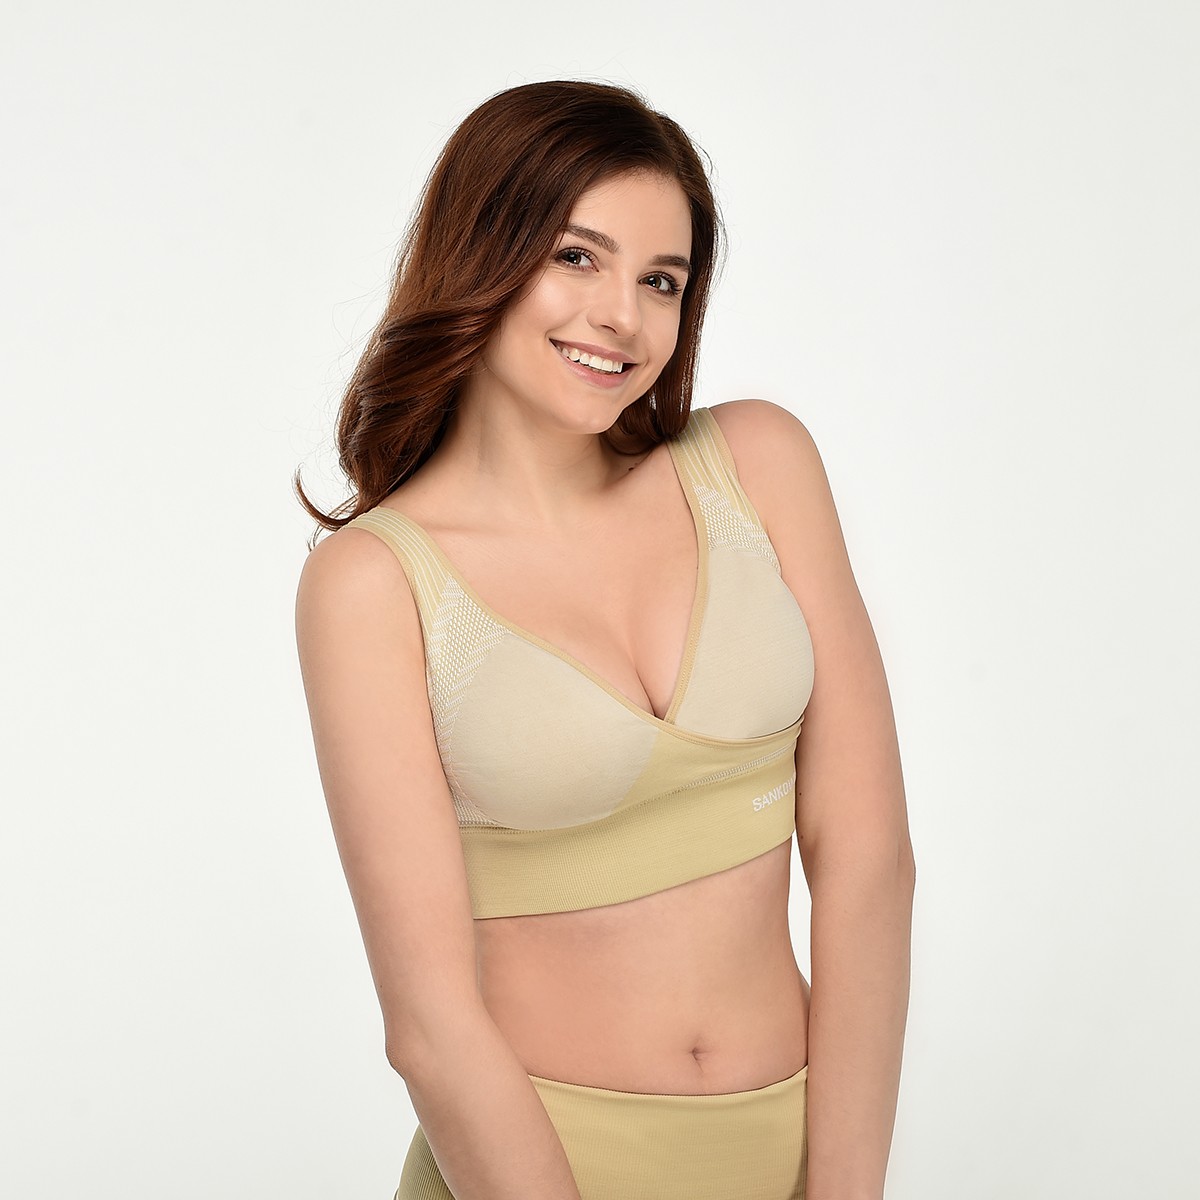 Sankom - Maternity Bra For Support And Posture - White